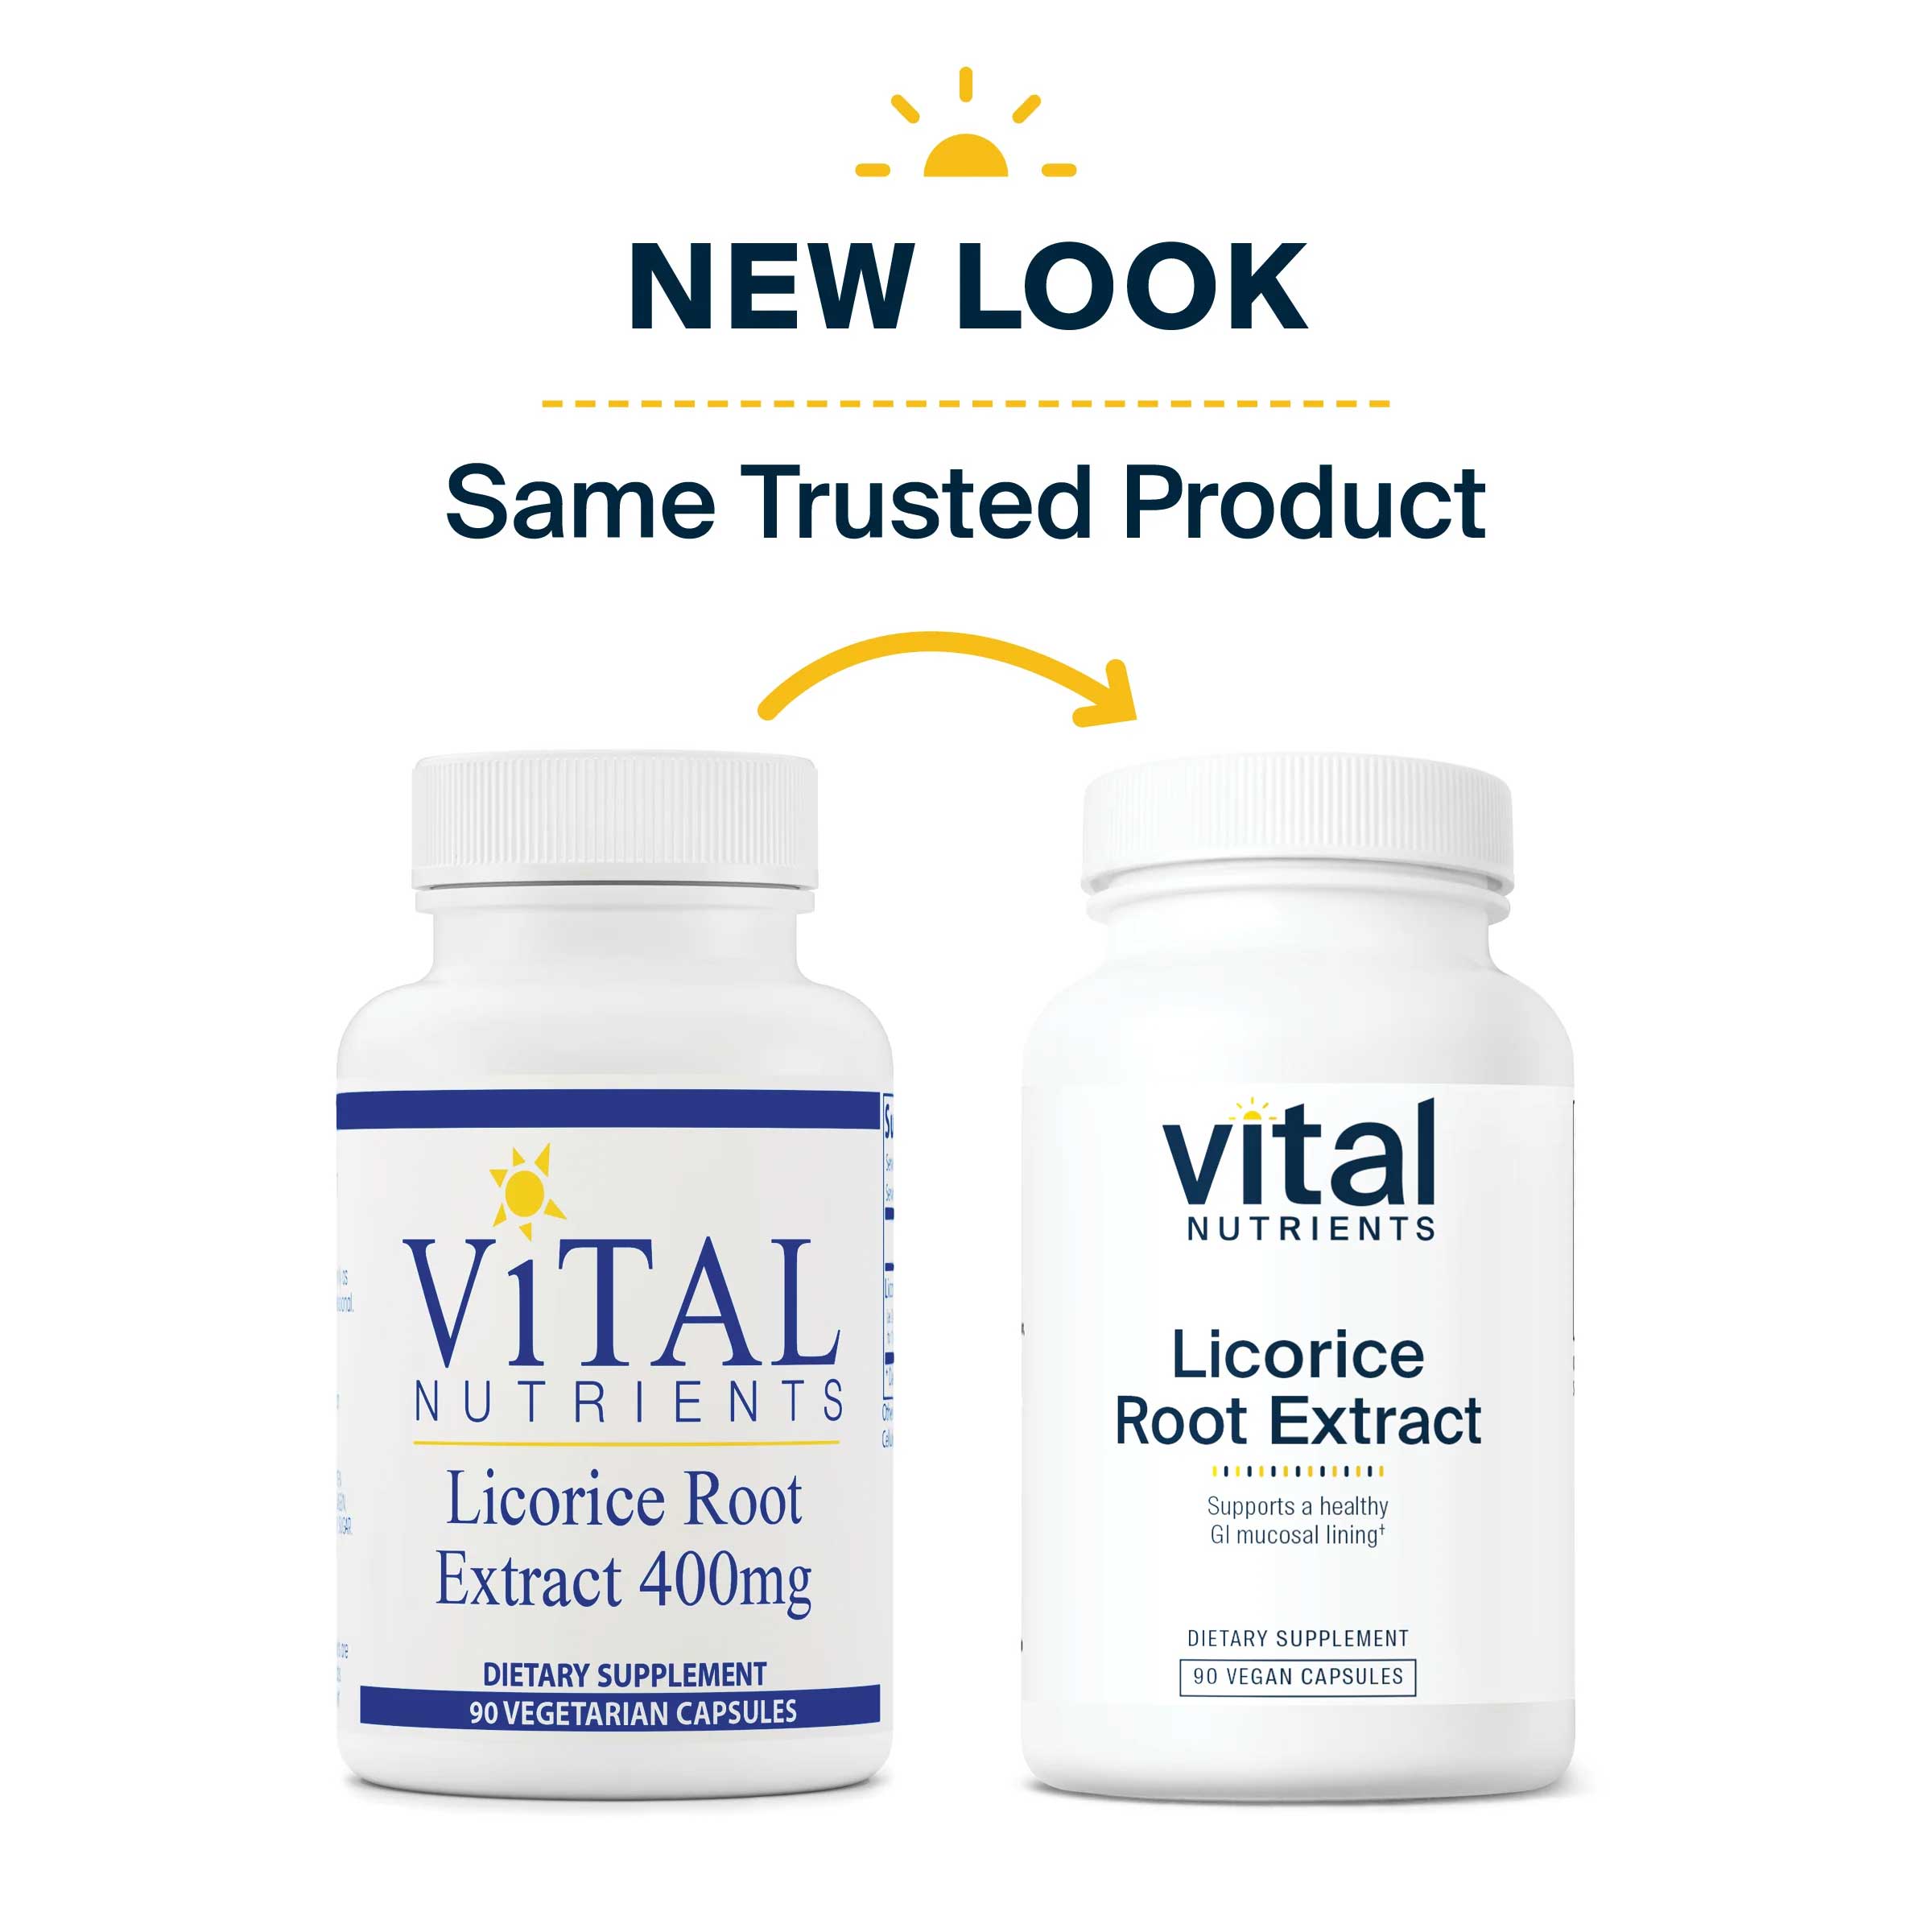 Vital Nutrients Licorice Root Extract 400mg New Look